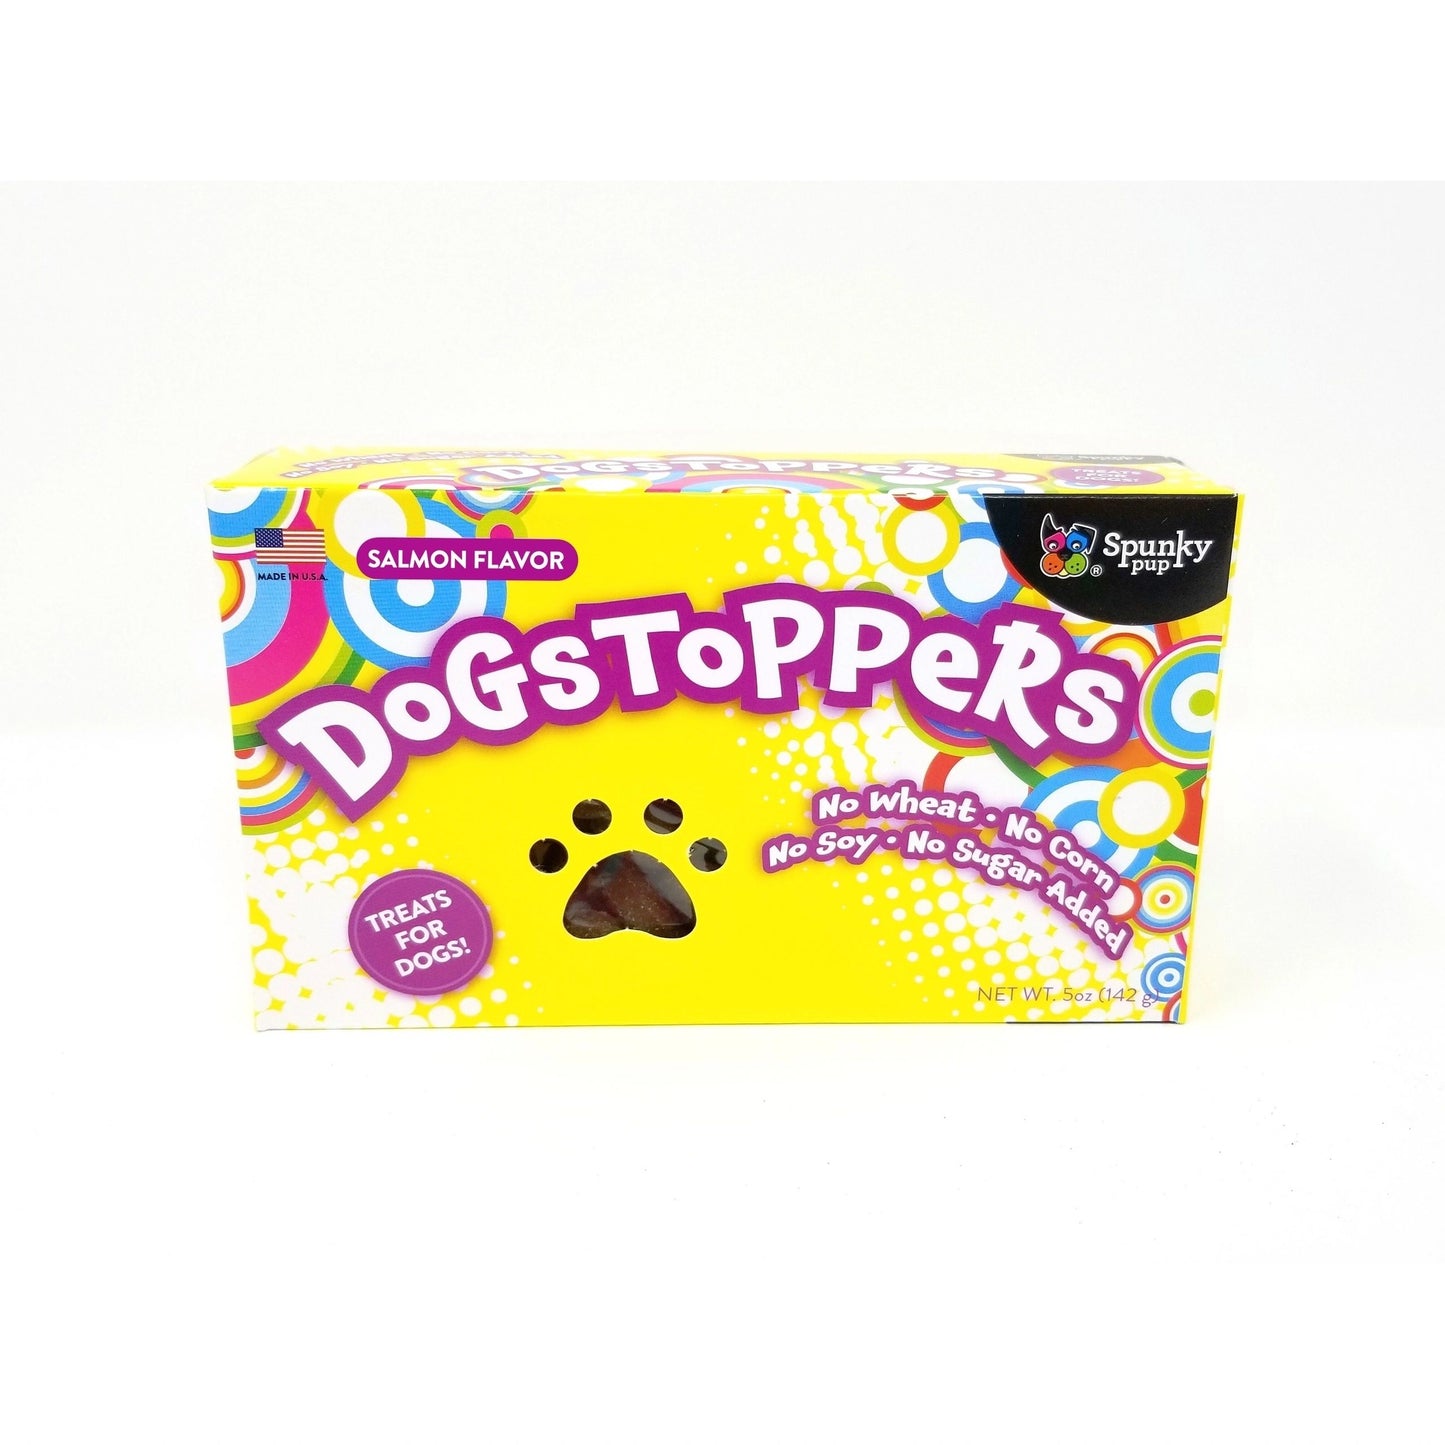 Dogstoppers